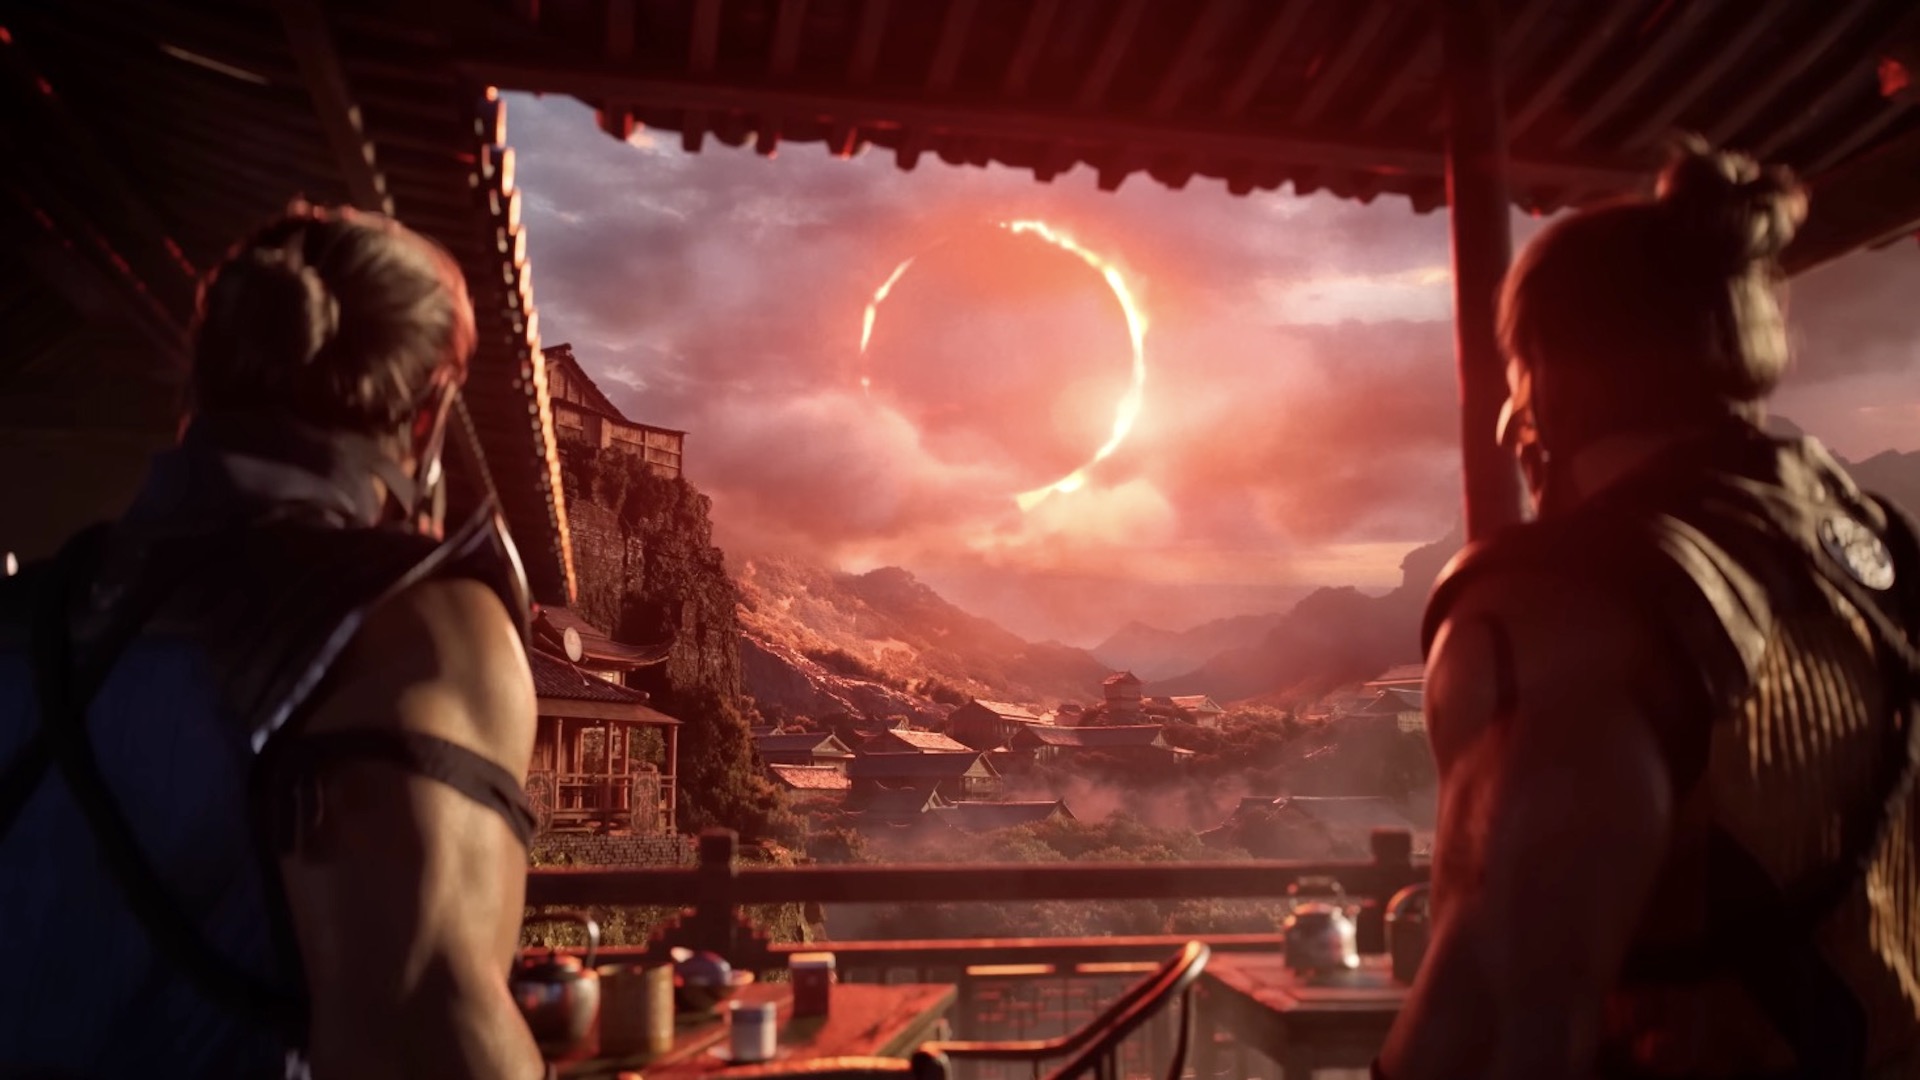 Scorpion and Sub-Zero stand side-by-side, looking up a red glowing celestial body, shining in the sky